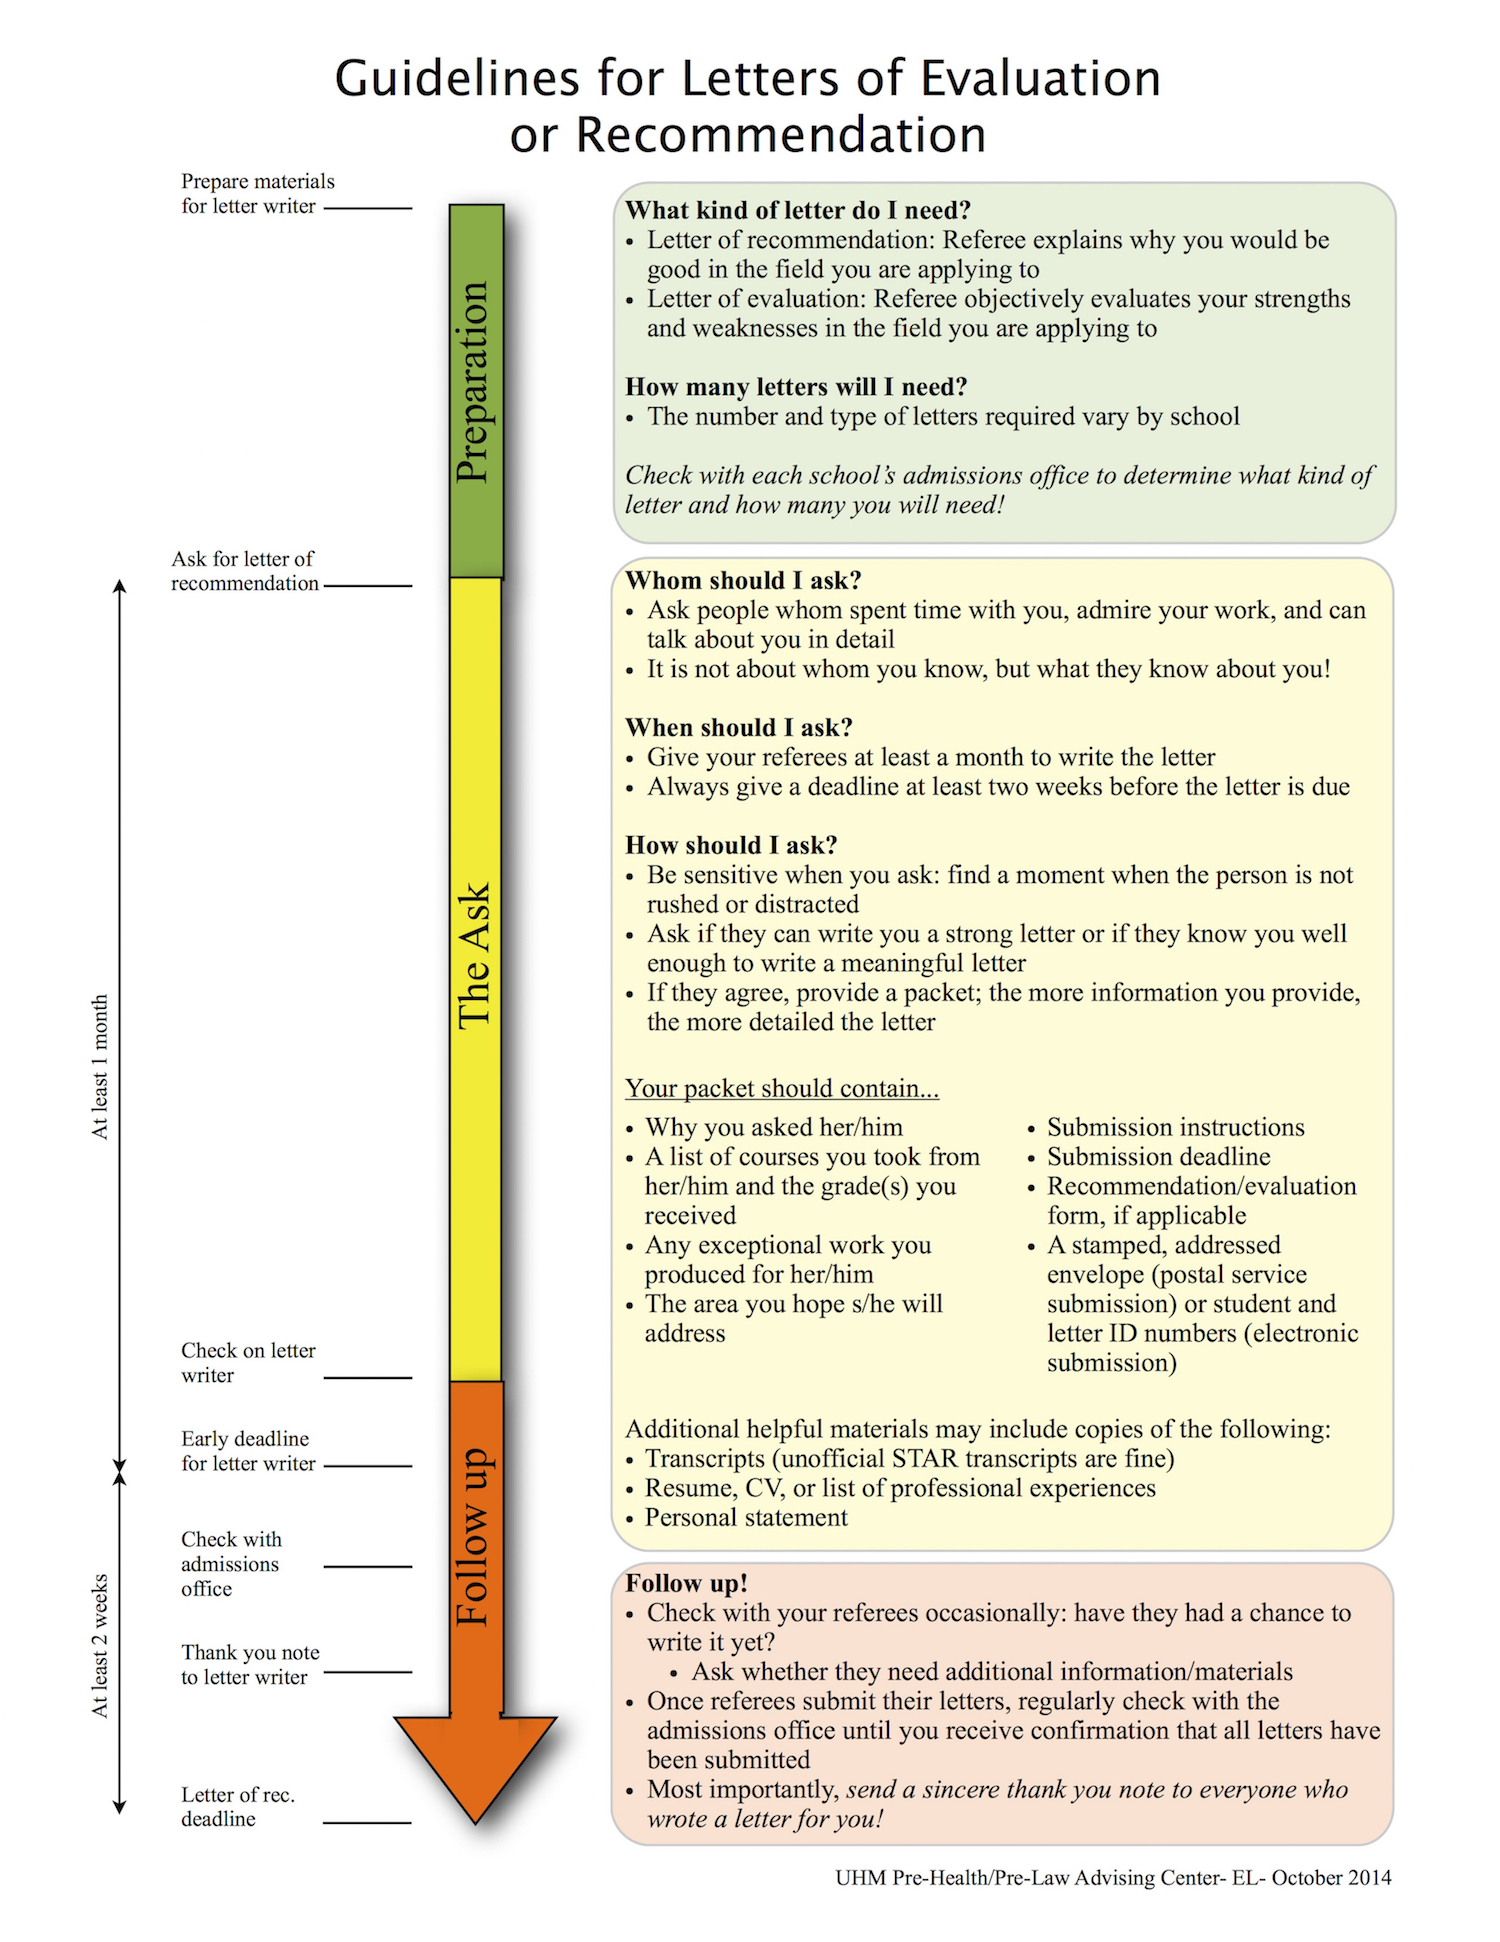 Guidelines For Letters Of Evaluation Or Recommendation Pre with dimensions 1500 X 1942